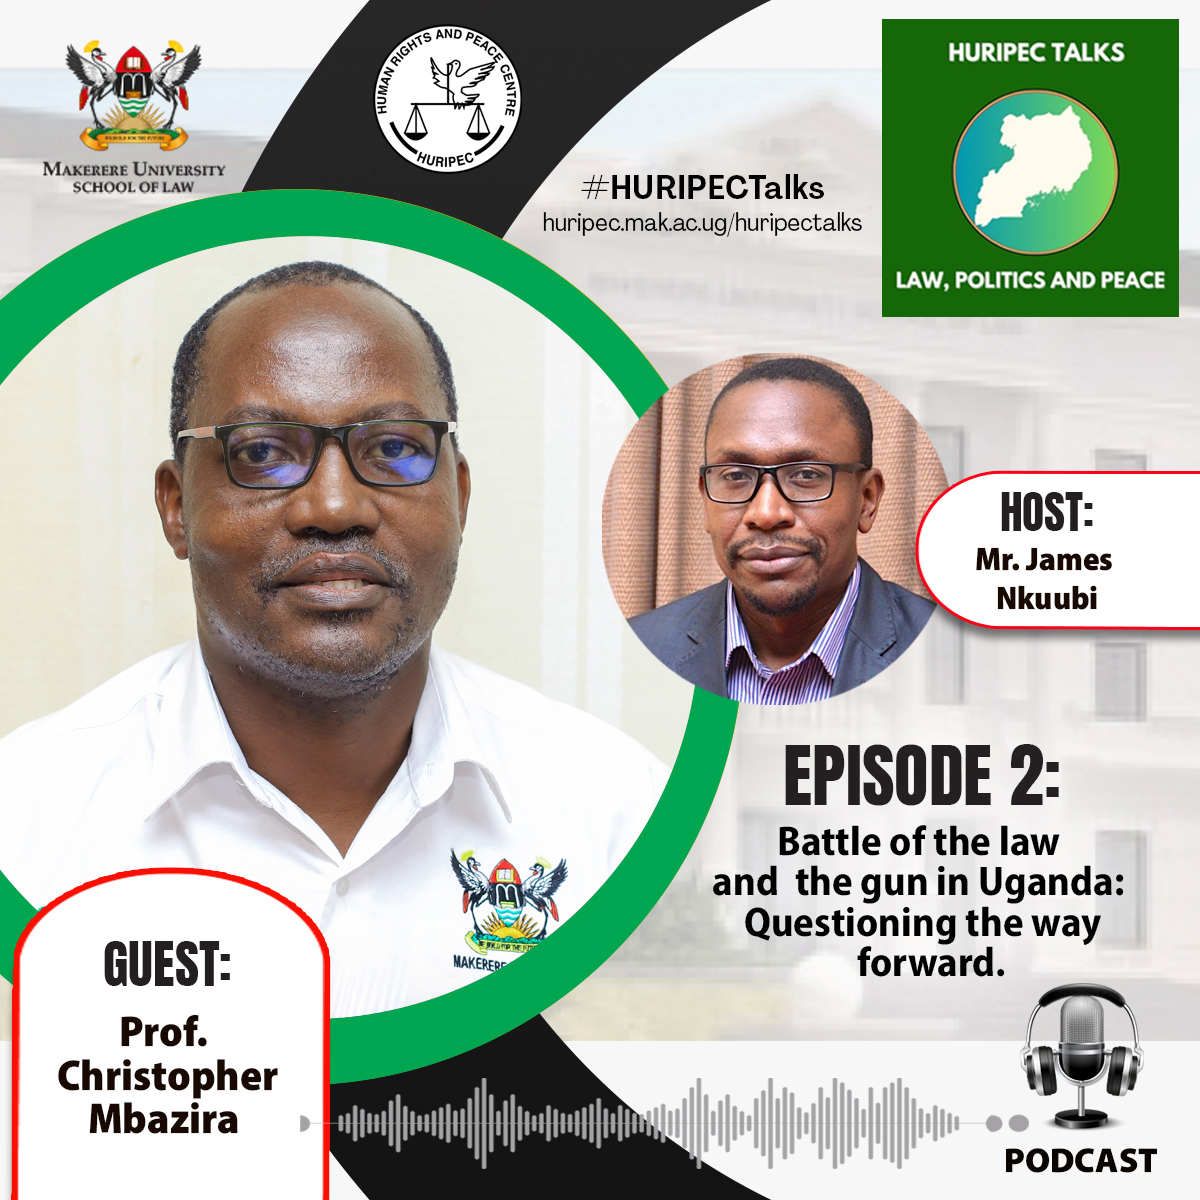 The #HURIPECTalks podcast is available online at huripec.mak.ac.ug/huripectalks Share with friends. Episode 2 has #Prof.ChristopherMbazira @bazzira as guest hosted by #JamesNkuubi on the topic: Battle of the Law & the gun in Uganda: Questioning the way forward.